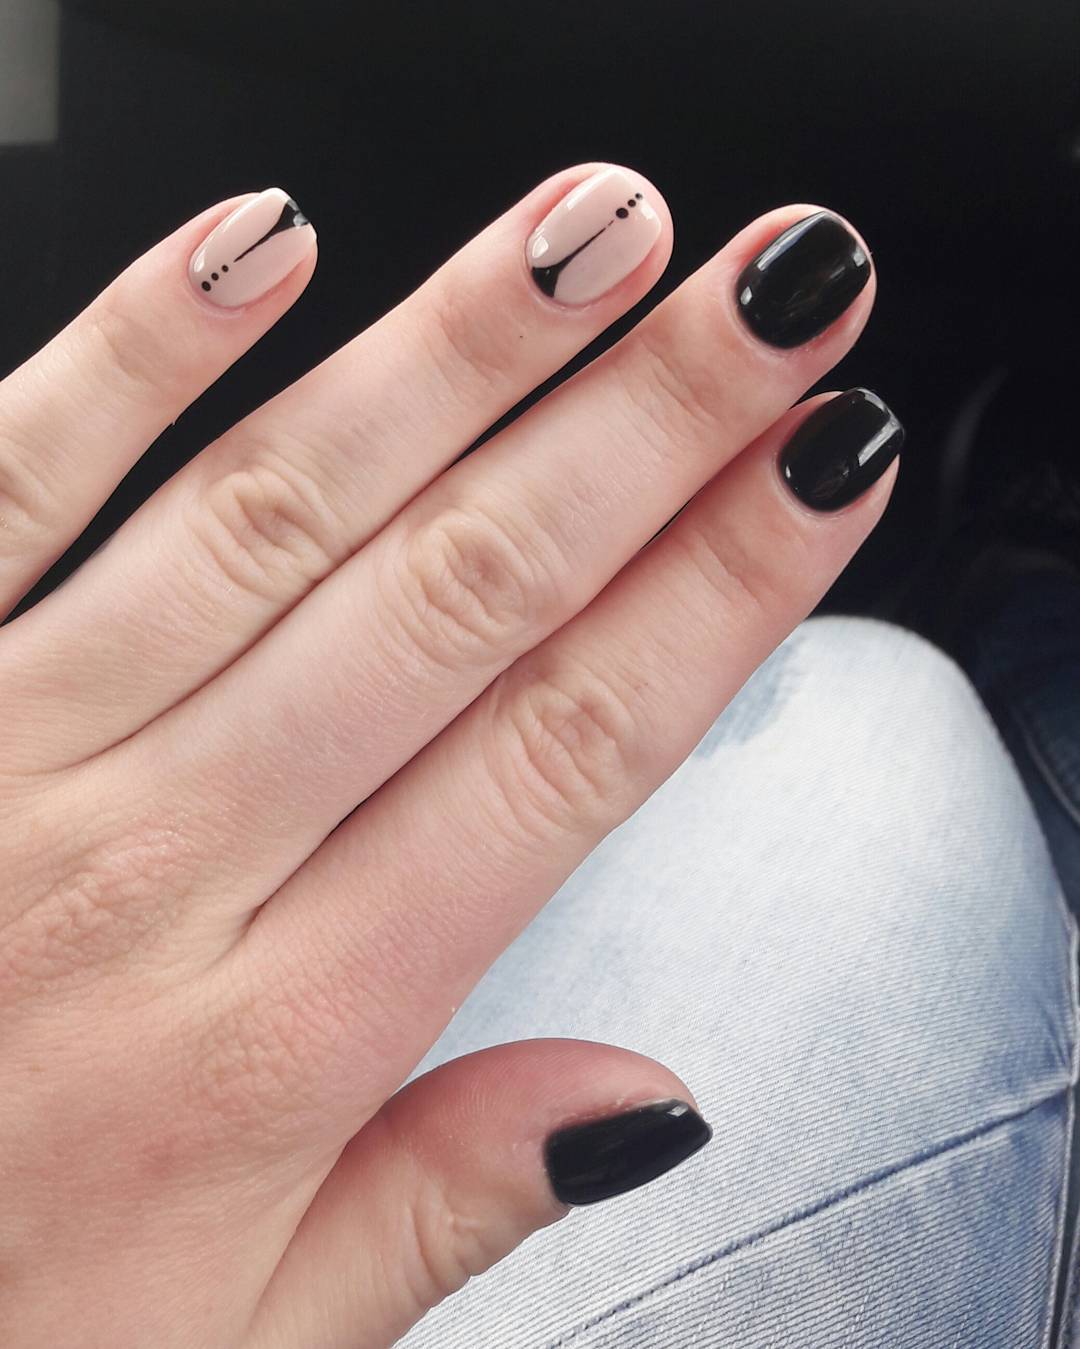 Black Squared Nails with Neutral Exceptional Nail